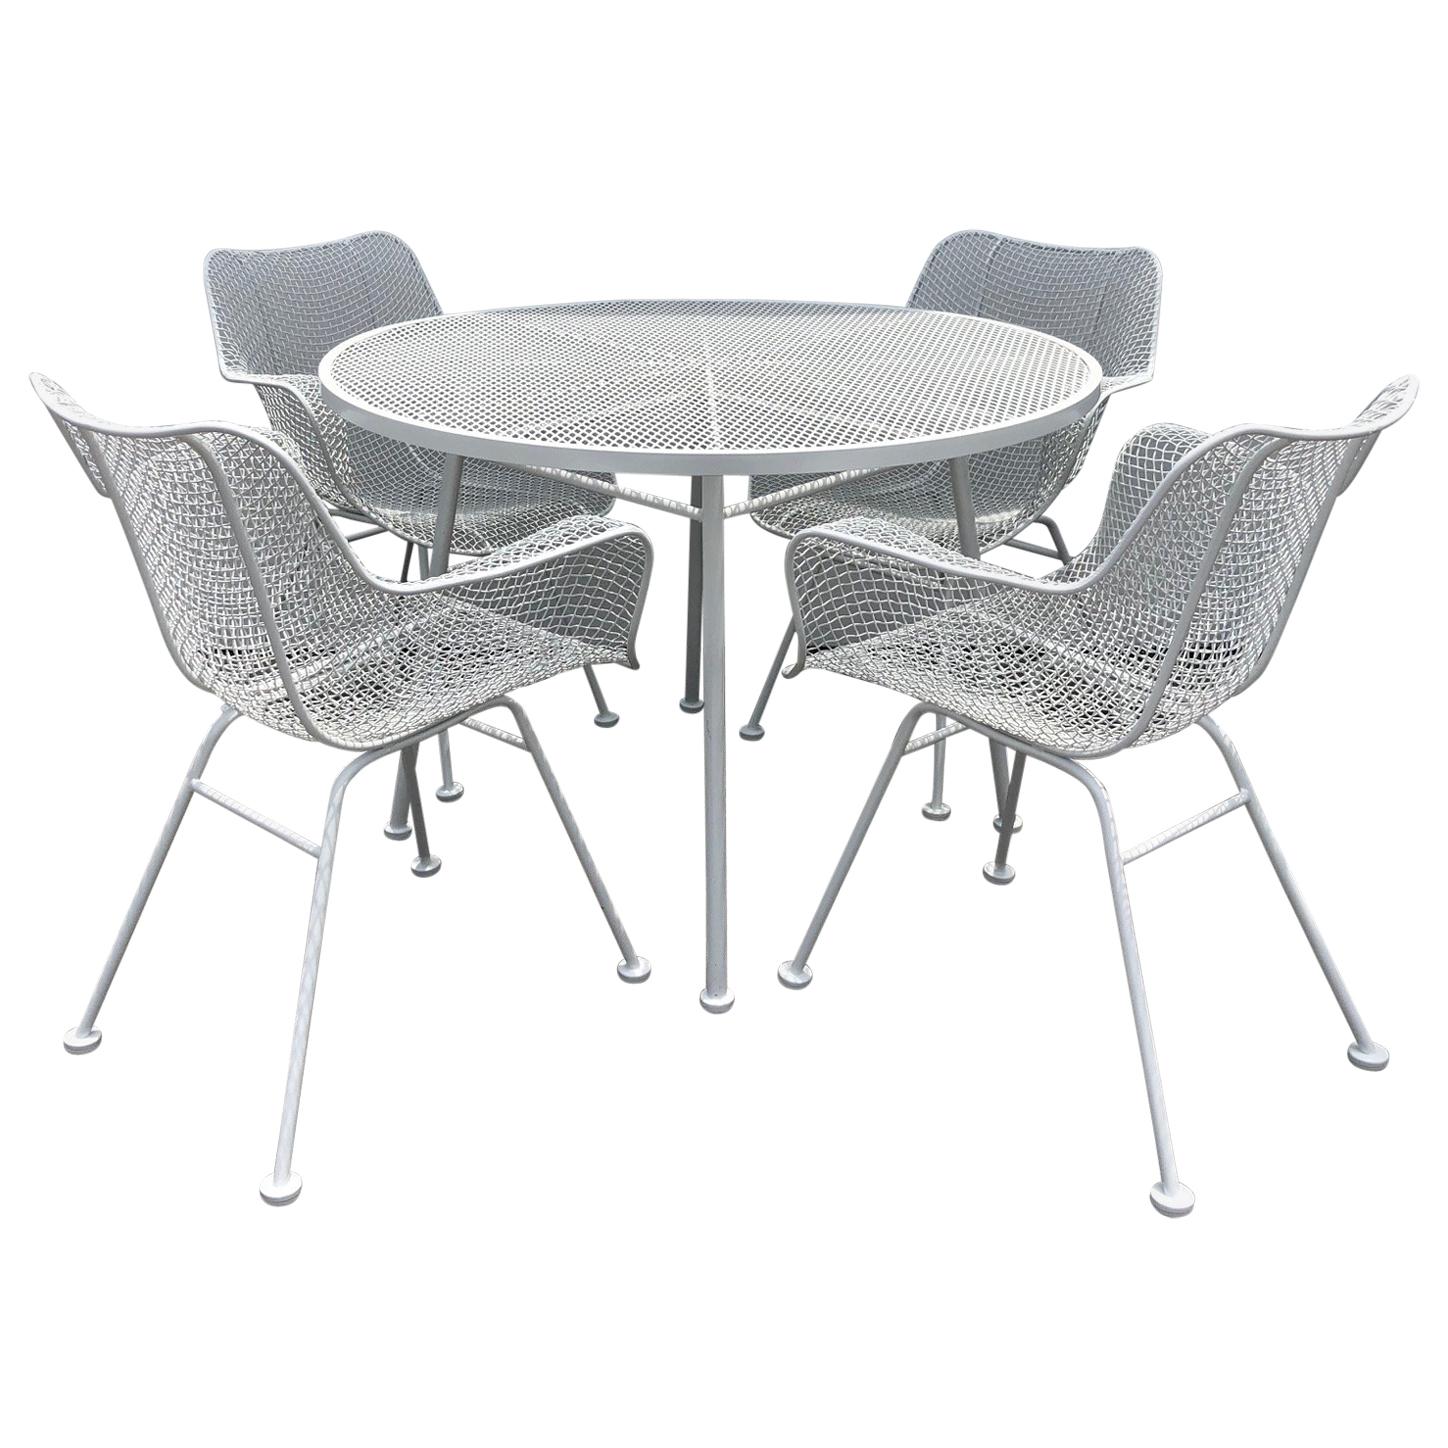 Five Piece Patio Dining Table and Chairs by Russell Woodard